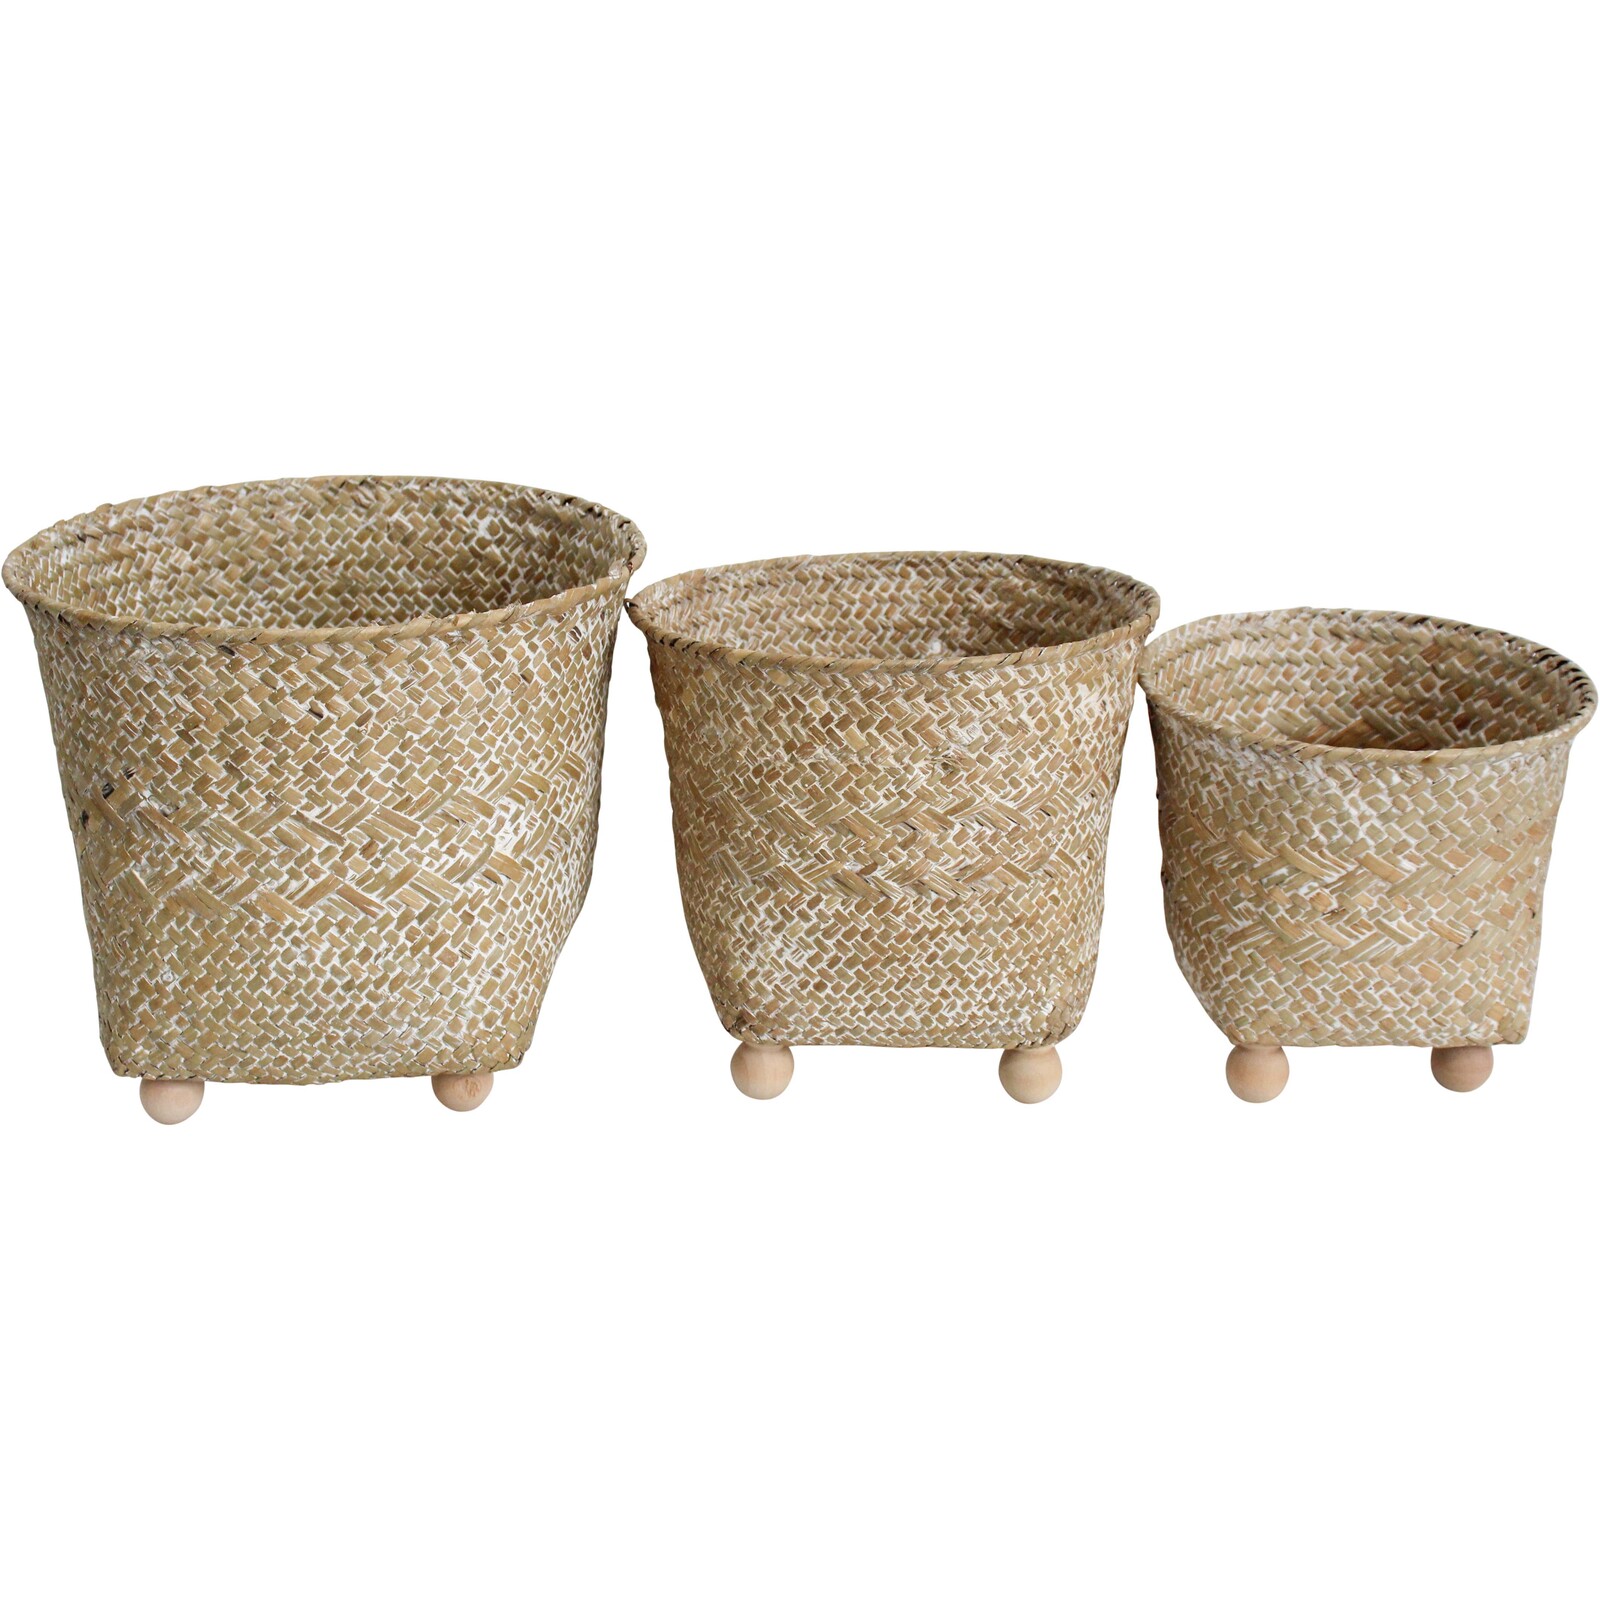 Woven Foot Planter S/3